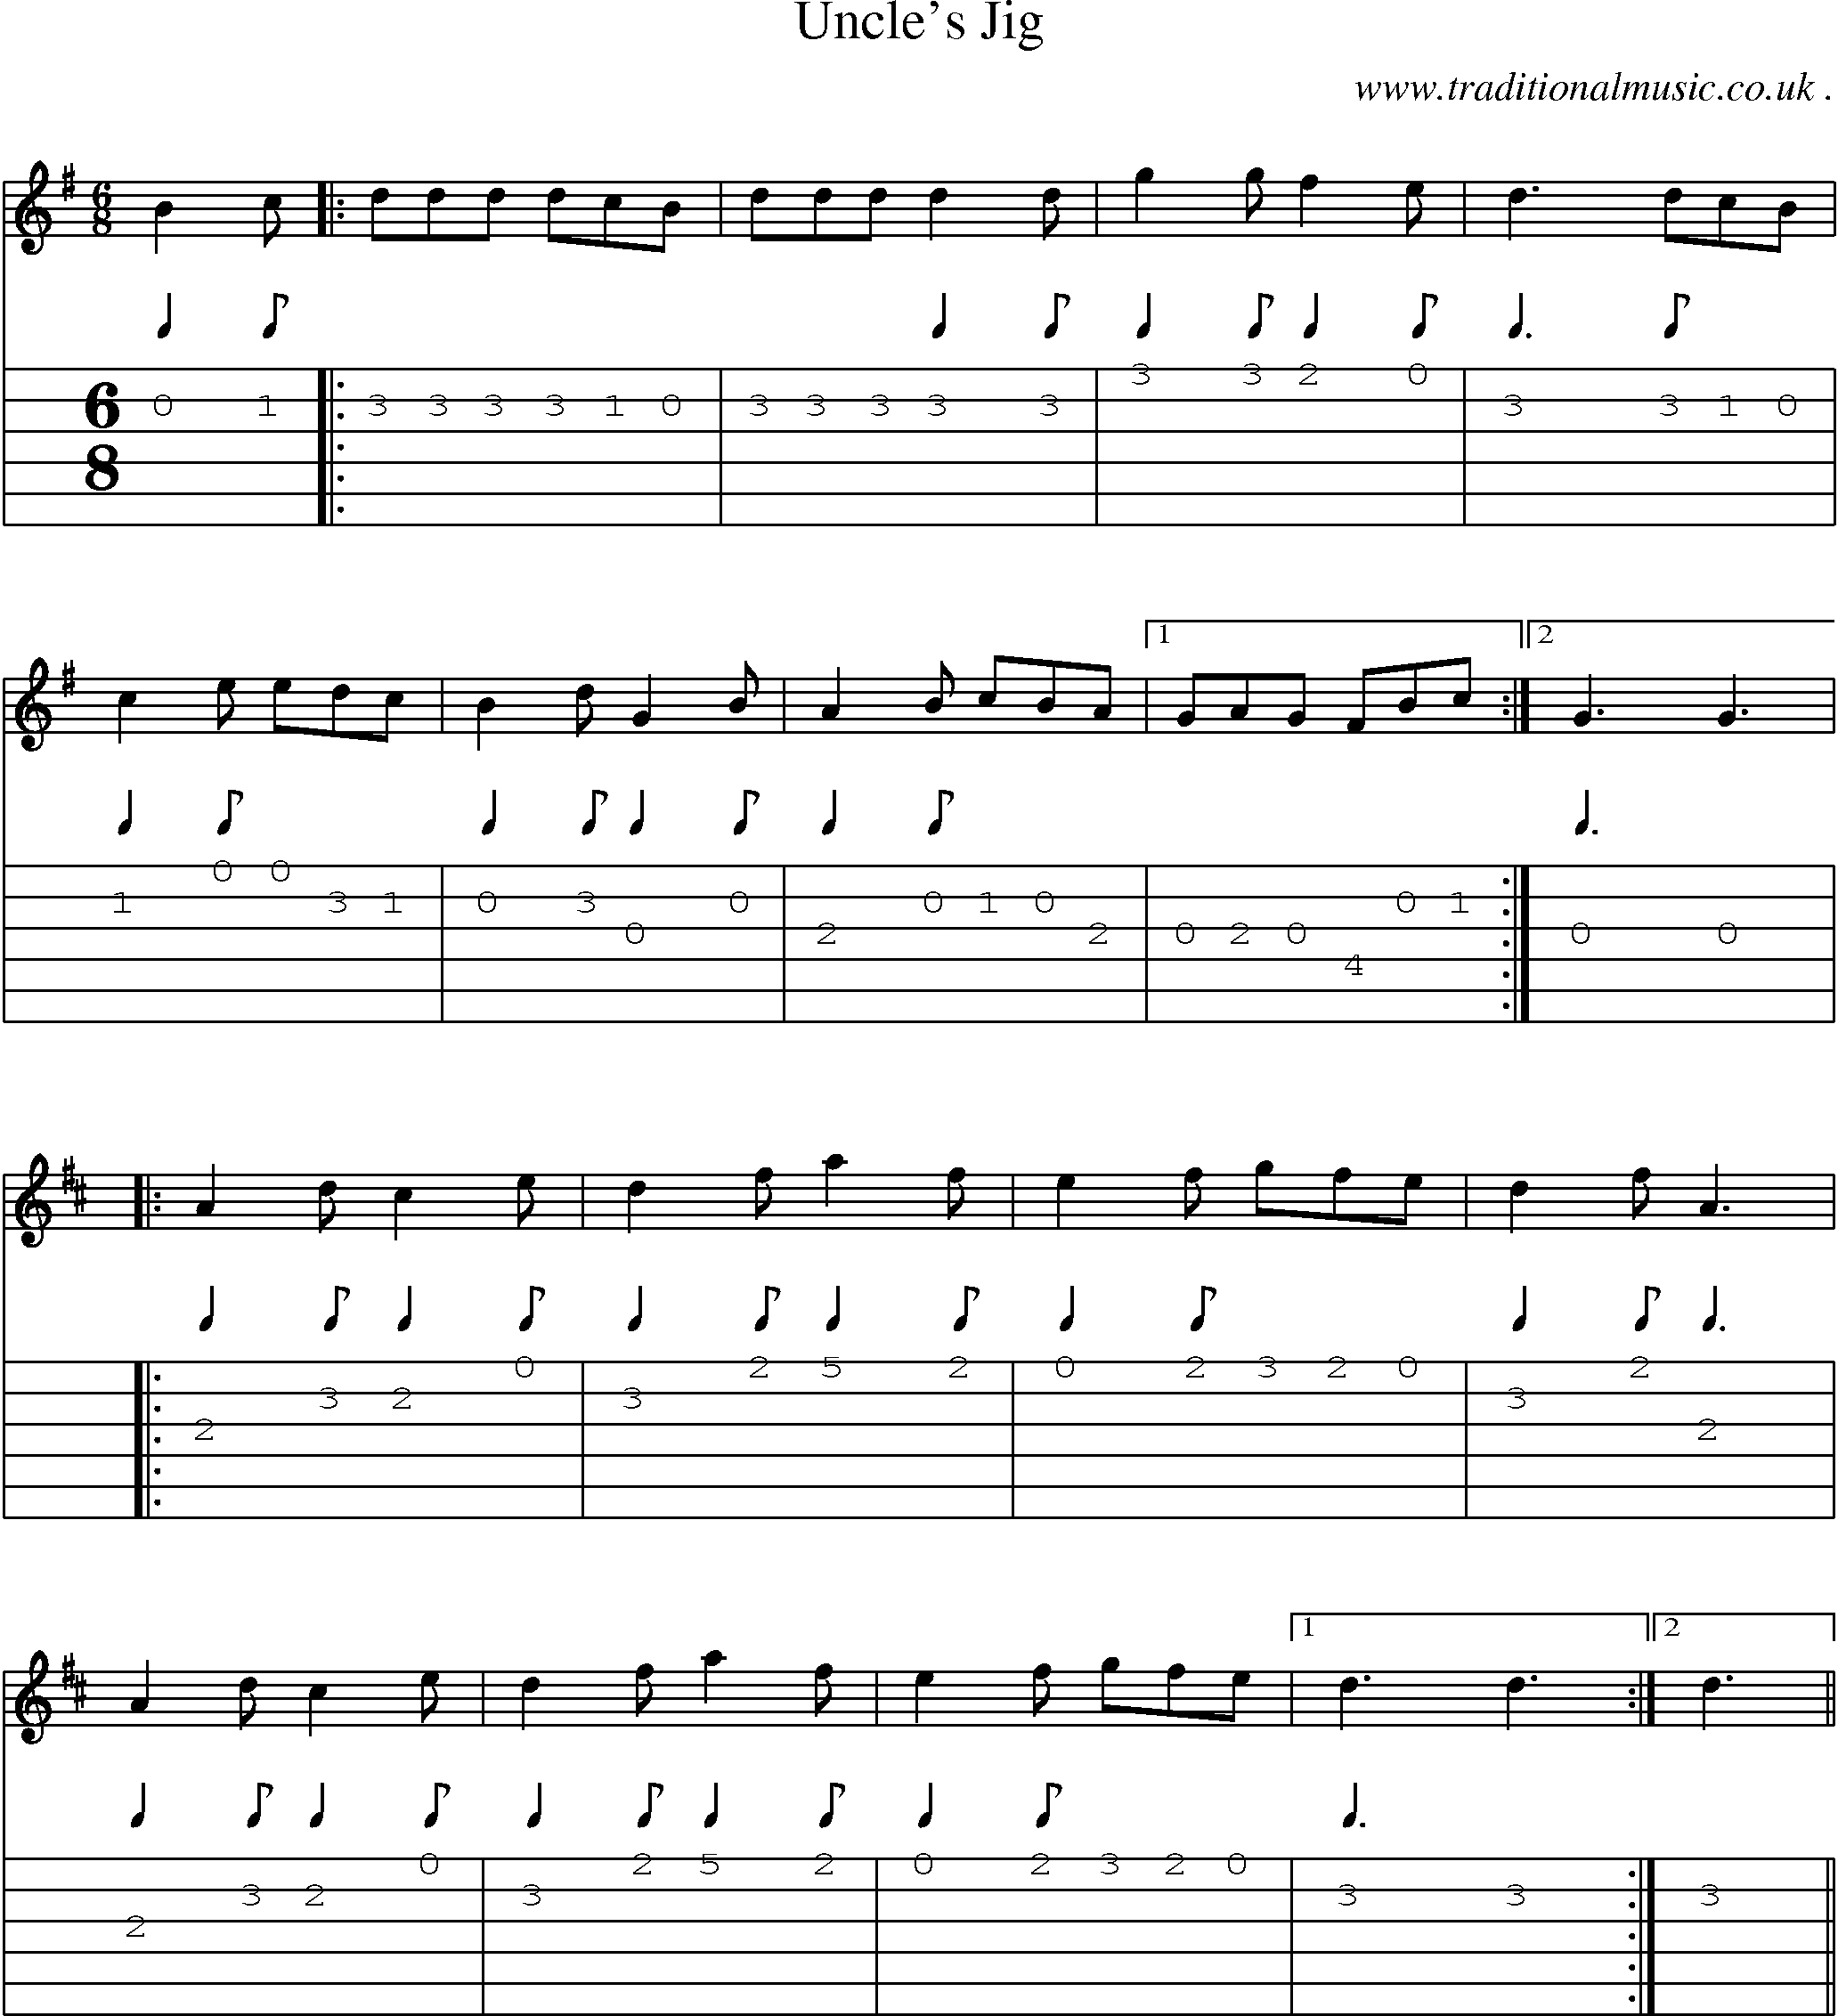 Sheet-Music and Guitar Tabs for Uncles Jig